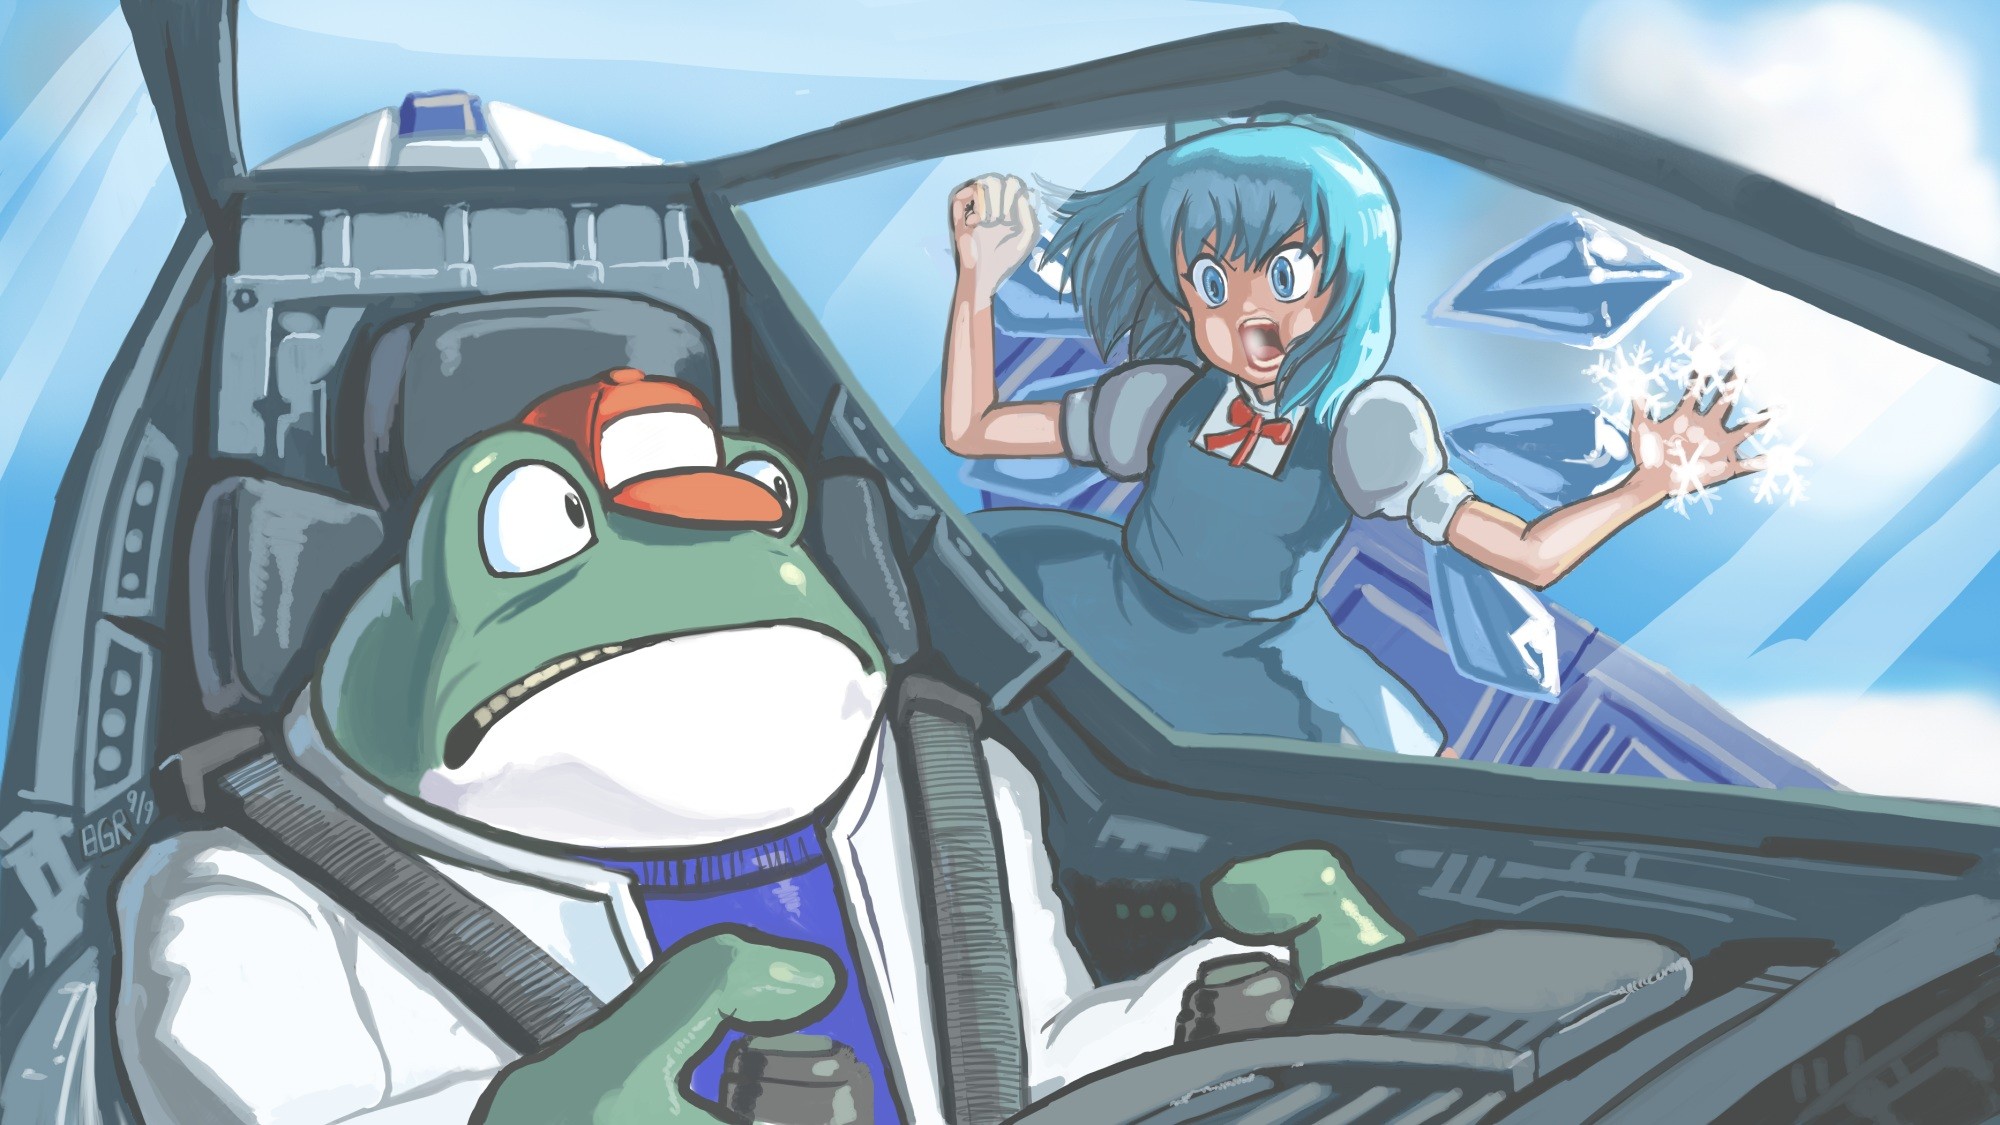 Anime 2000x1125 anime anime girls Touhou Cirno Star Fox crossover video game art video games blue hair vehicle blue eyes cockpit